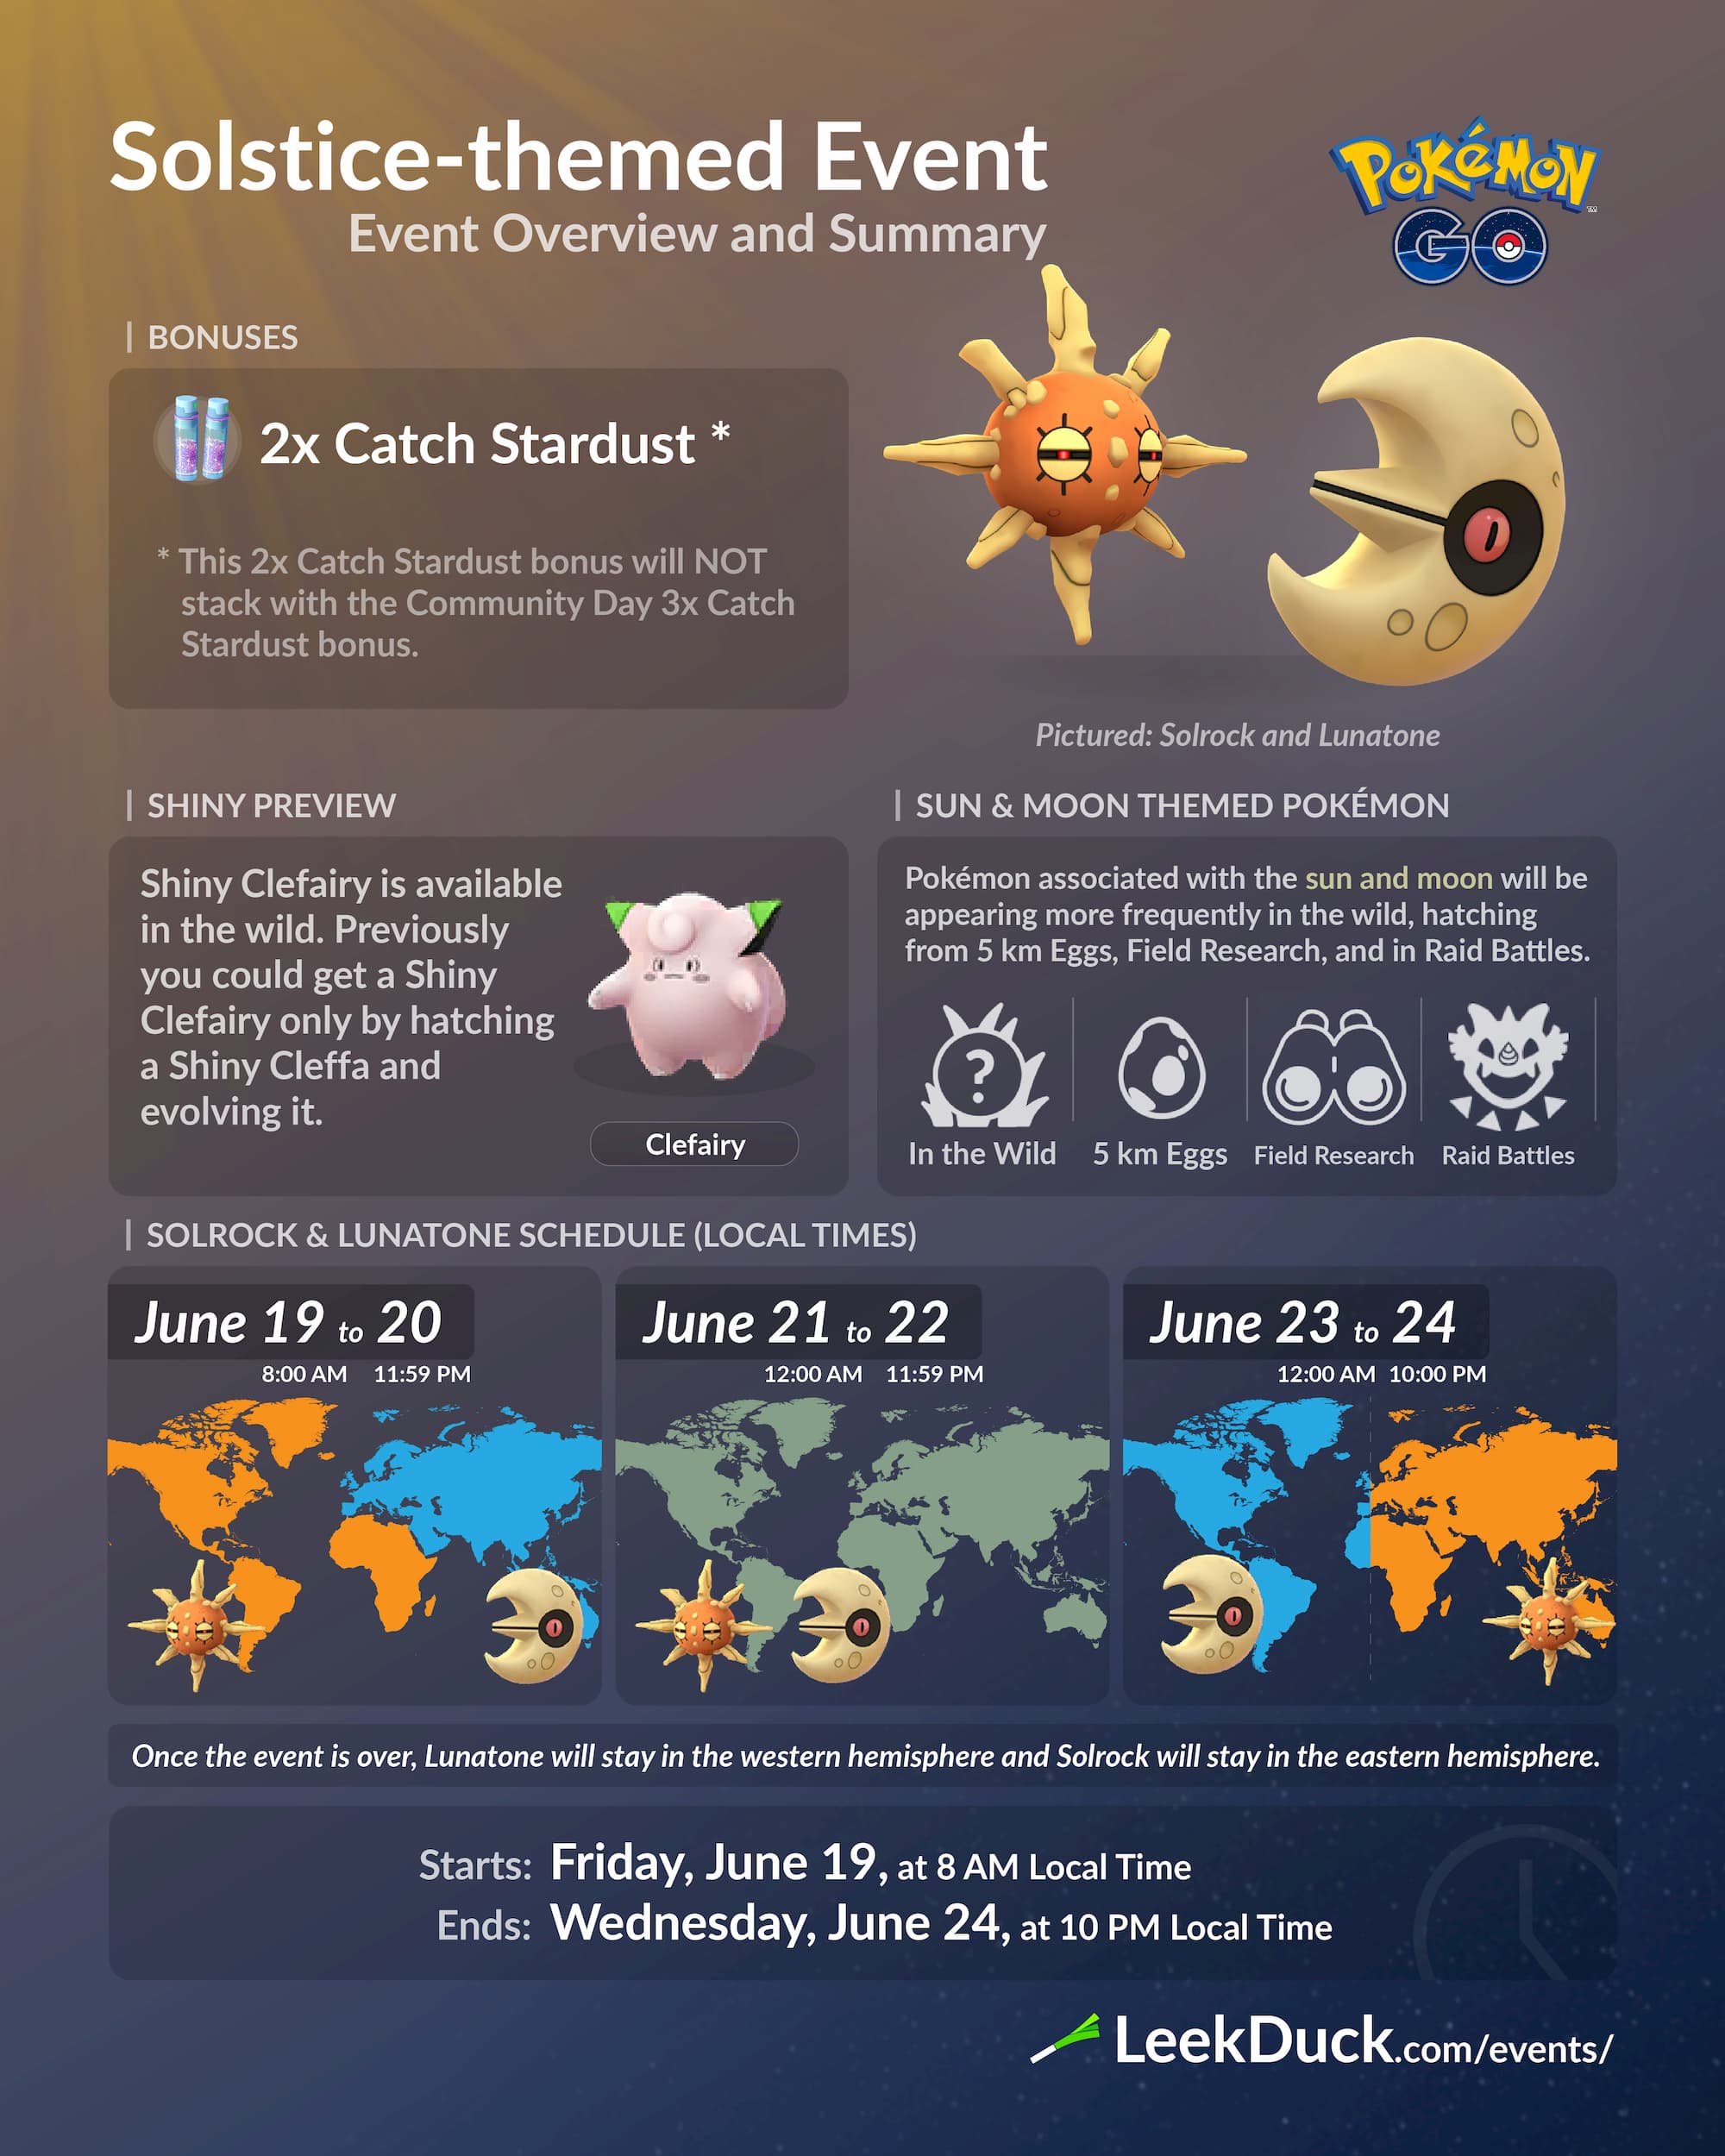 Pokémon GO March Events in 2020